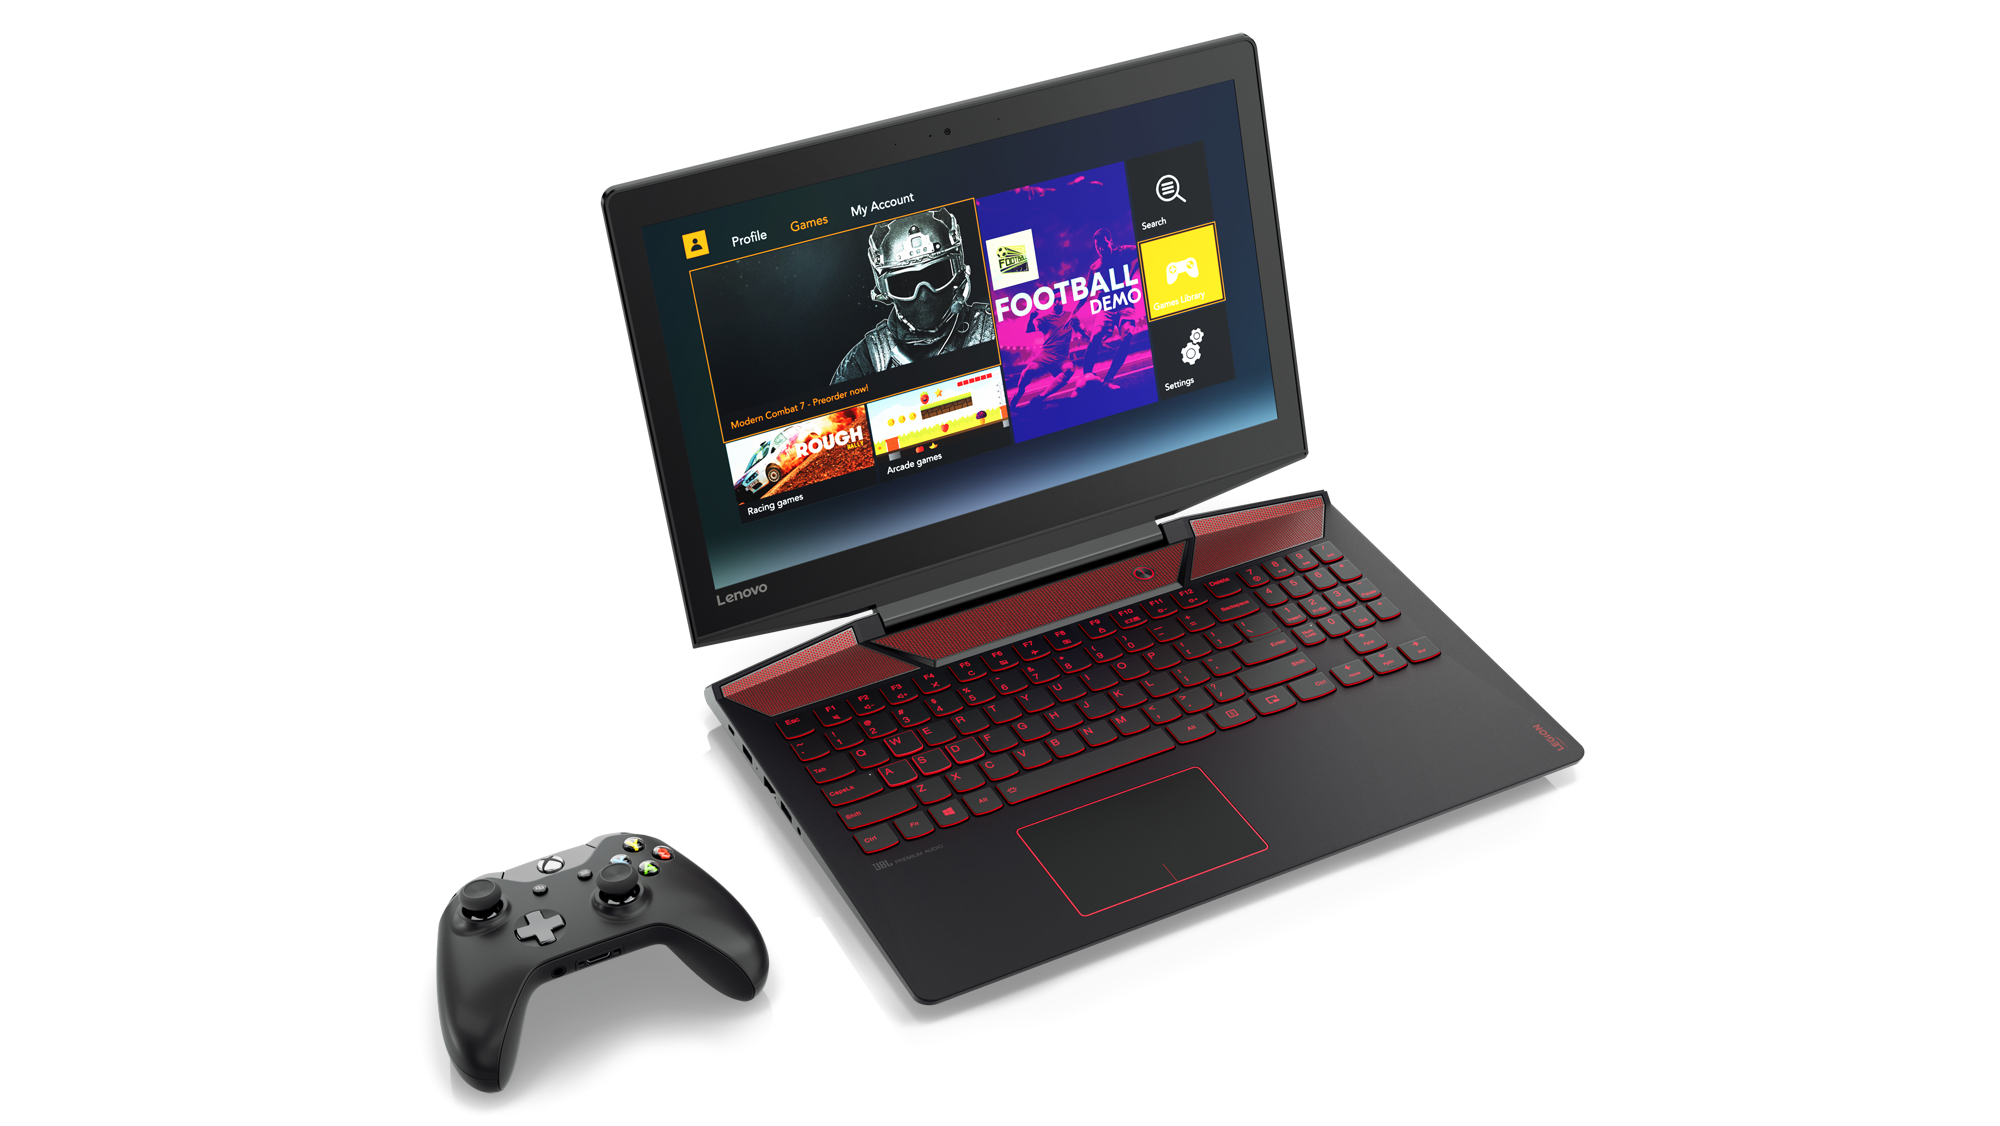 https://cdn.arstechnica.net/wp-content/uploads/2016/12/Lenovo-Legion-Y720-Laptop-wiht-optional-integrated-Xbox-One-Wireless-Receiver_1.png